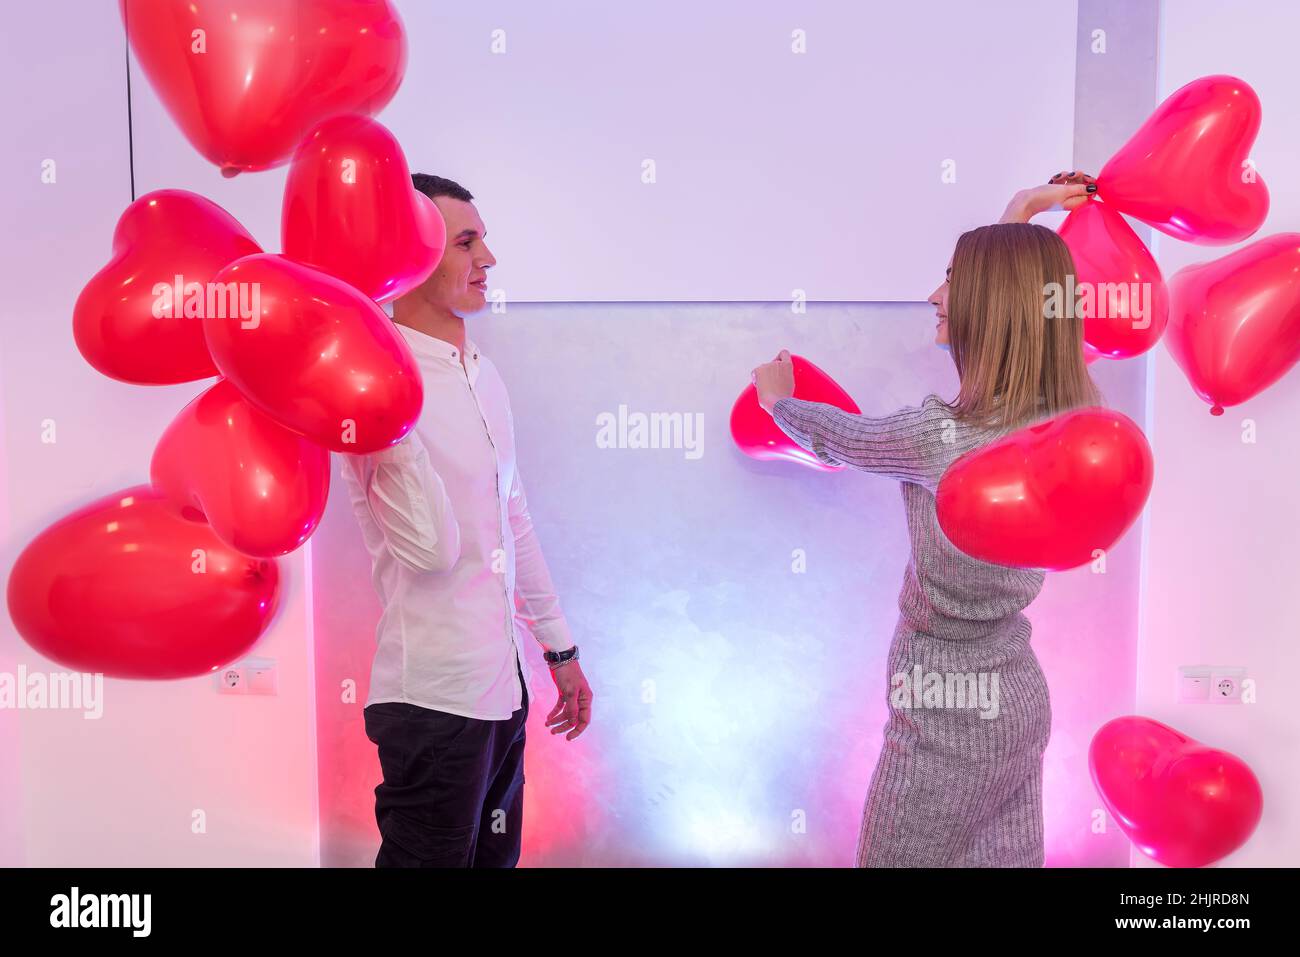 Beautiful couple with red air balloons celebrating Valentine's Day posing in studio Stock Photo